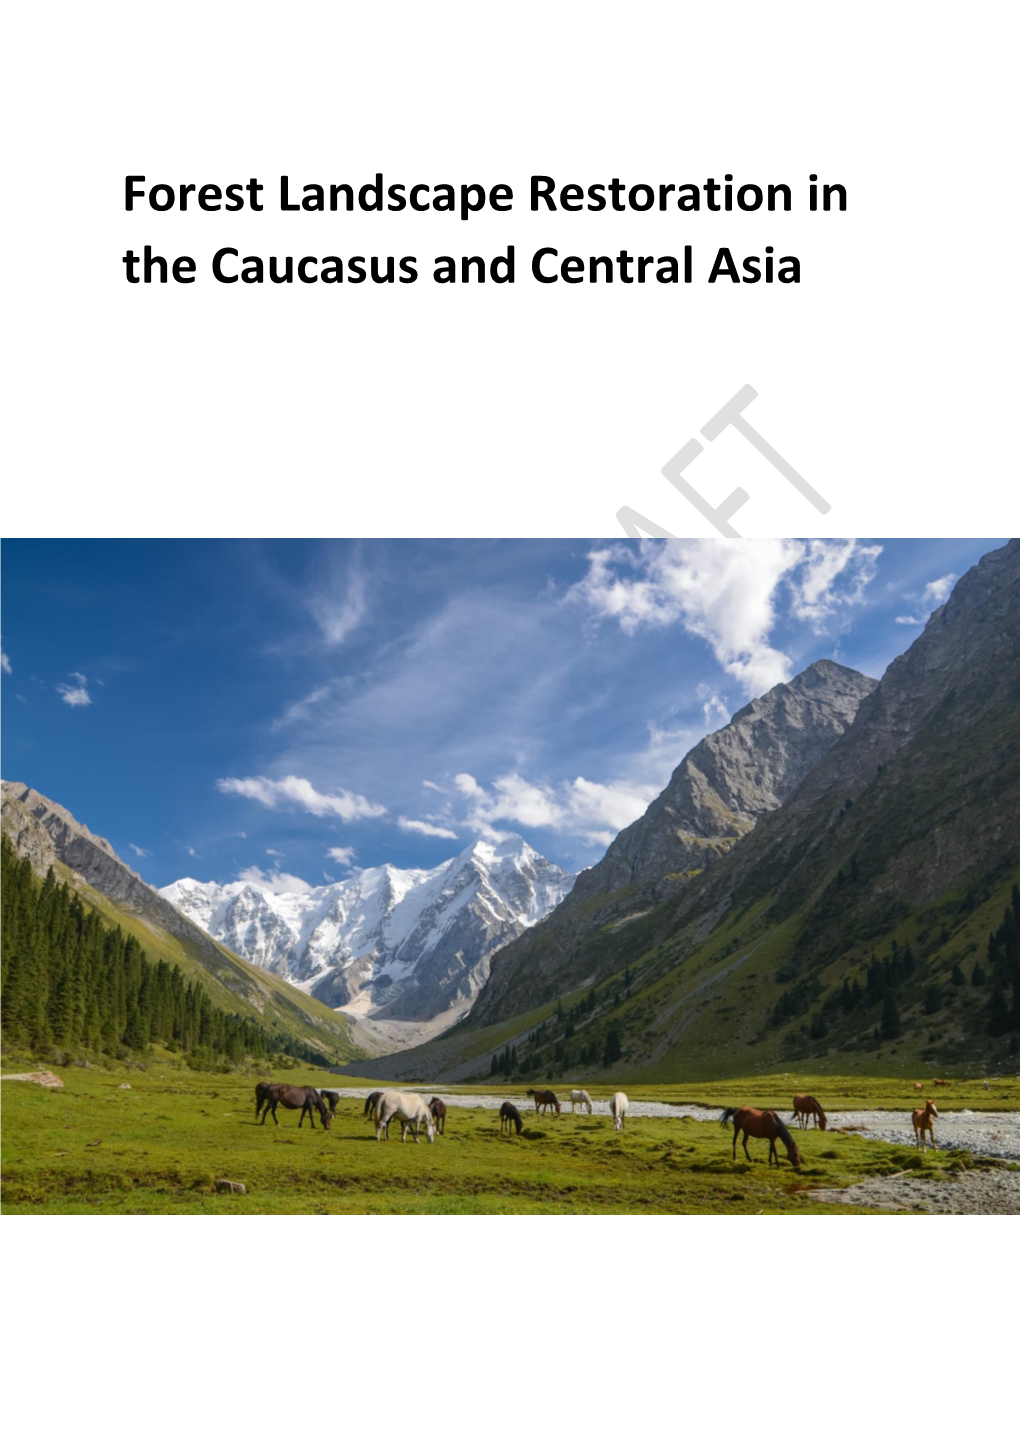 Forest Landscape Restoration in the Caucasus and Central Asia